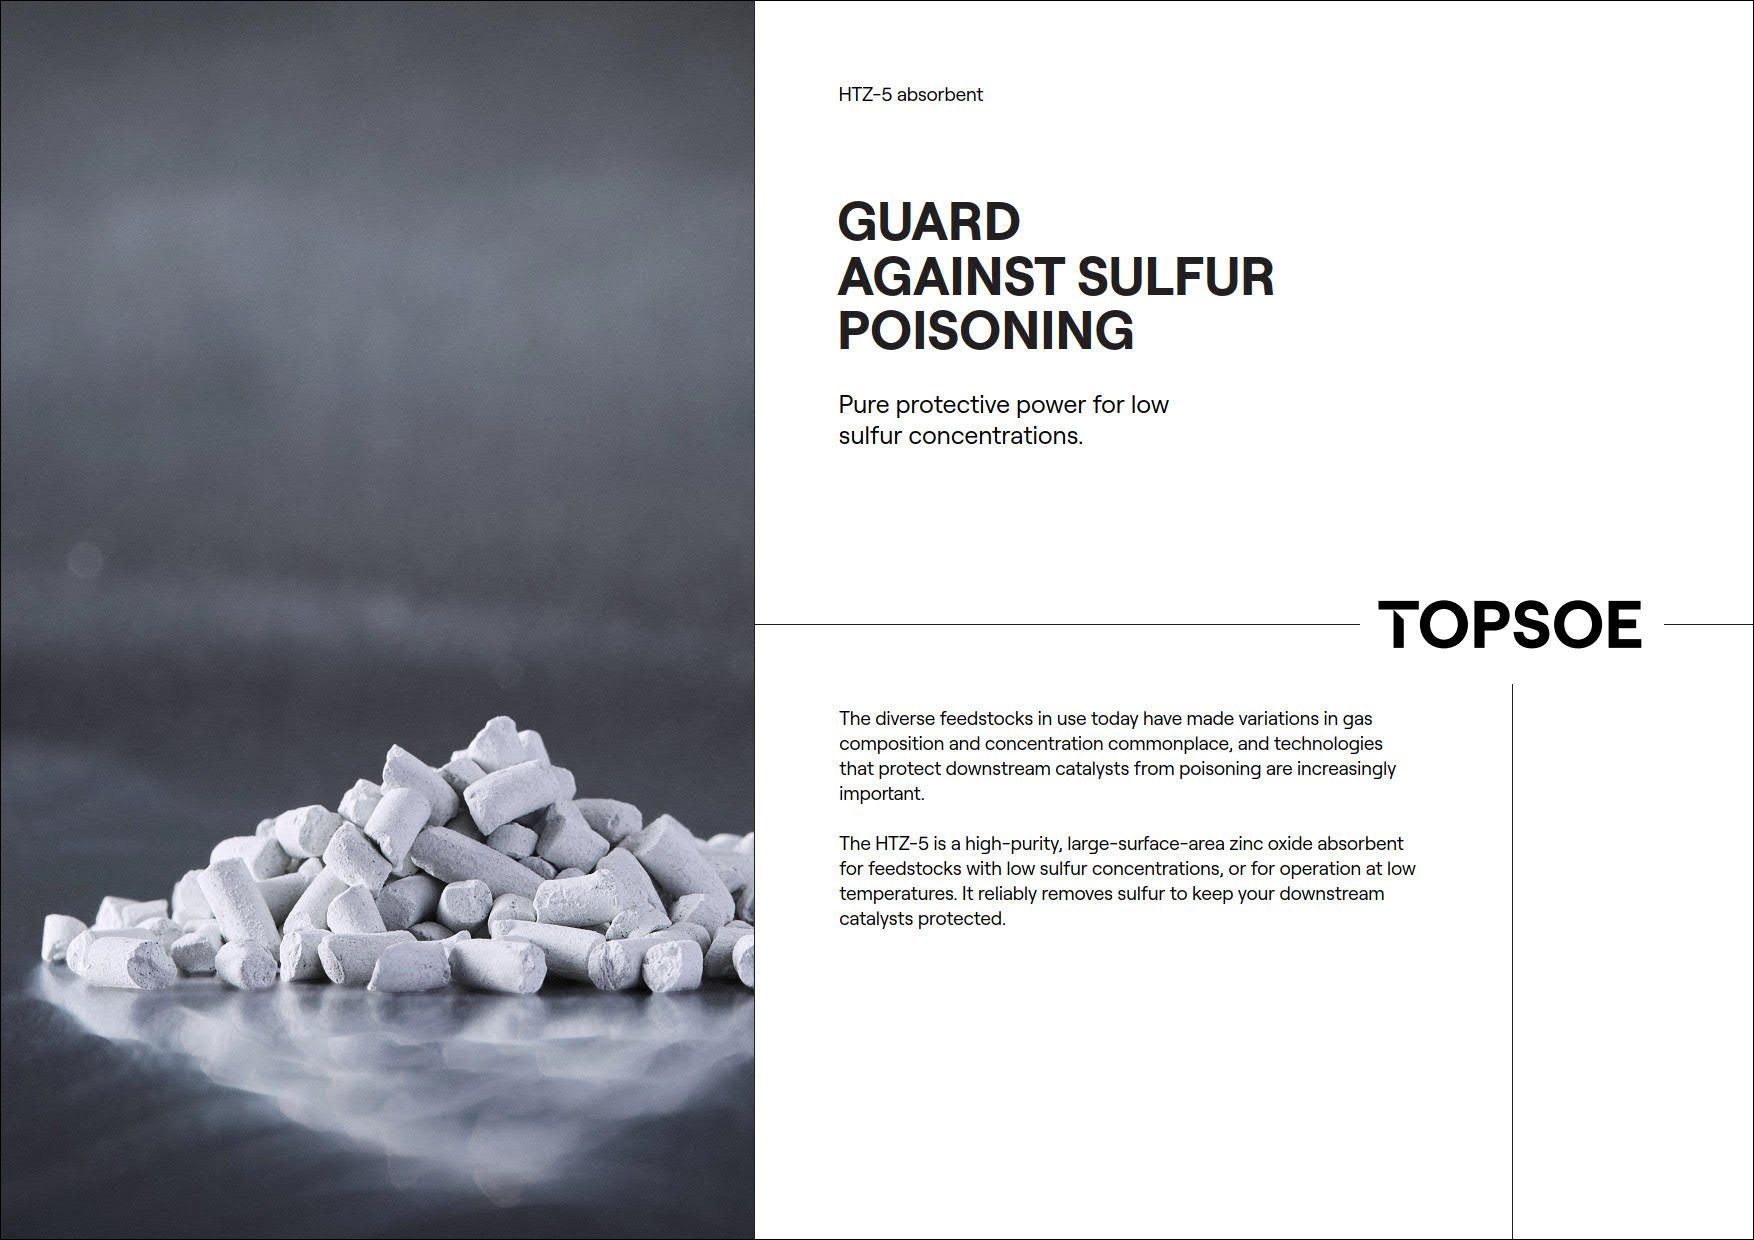 Guard against sulfur poisoning